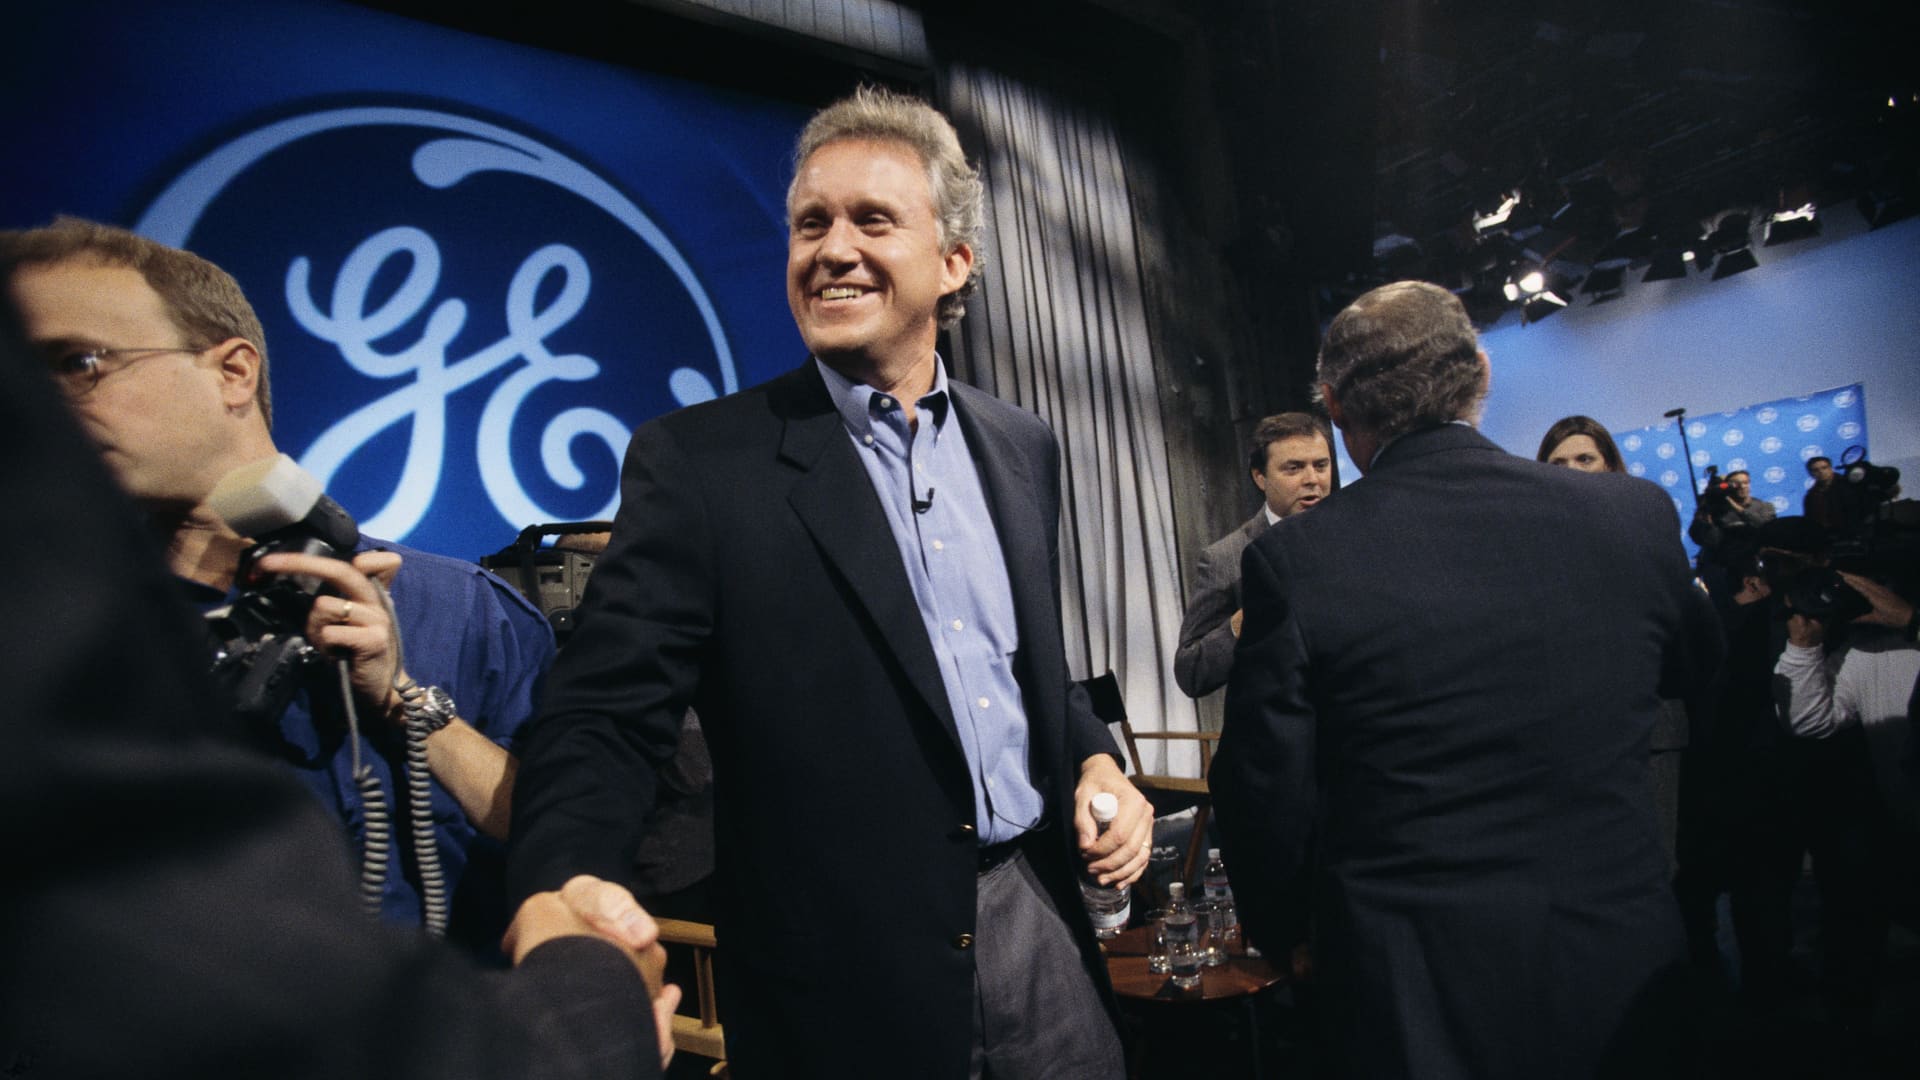 Robots taking jobs in five years is BS, says GE CEO Jeff Immelt